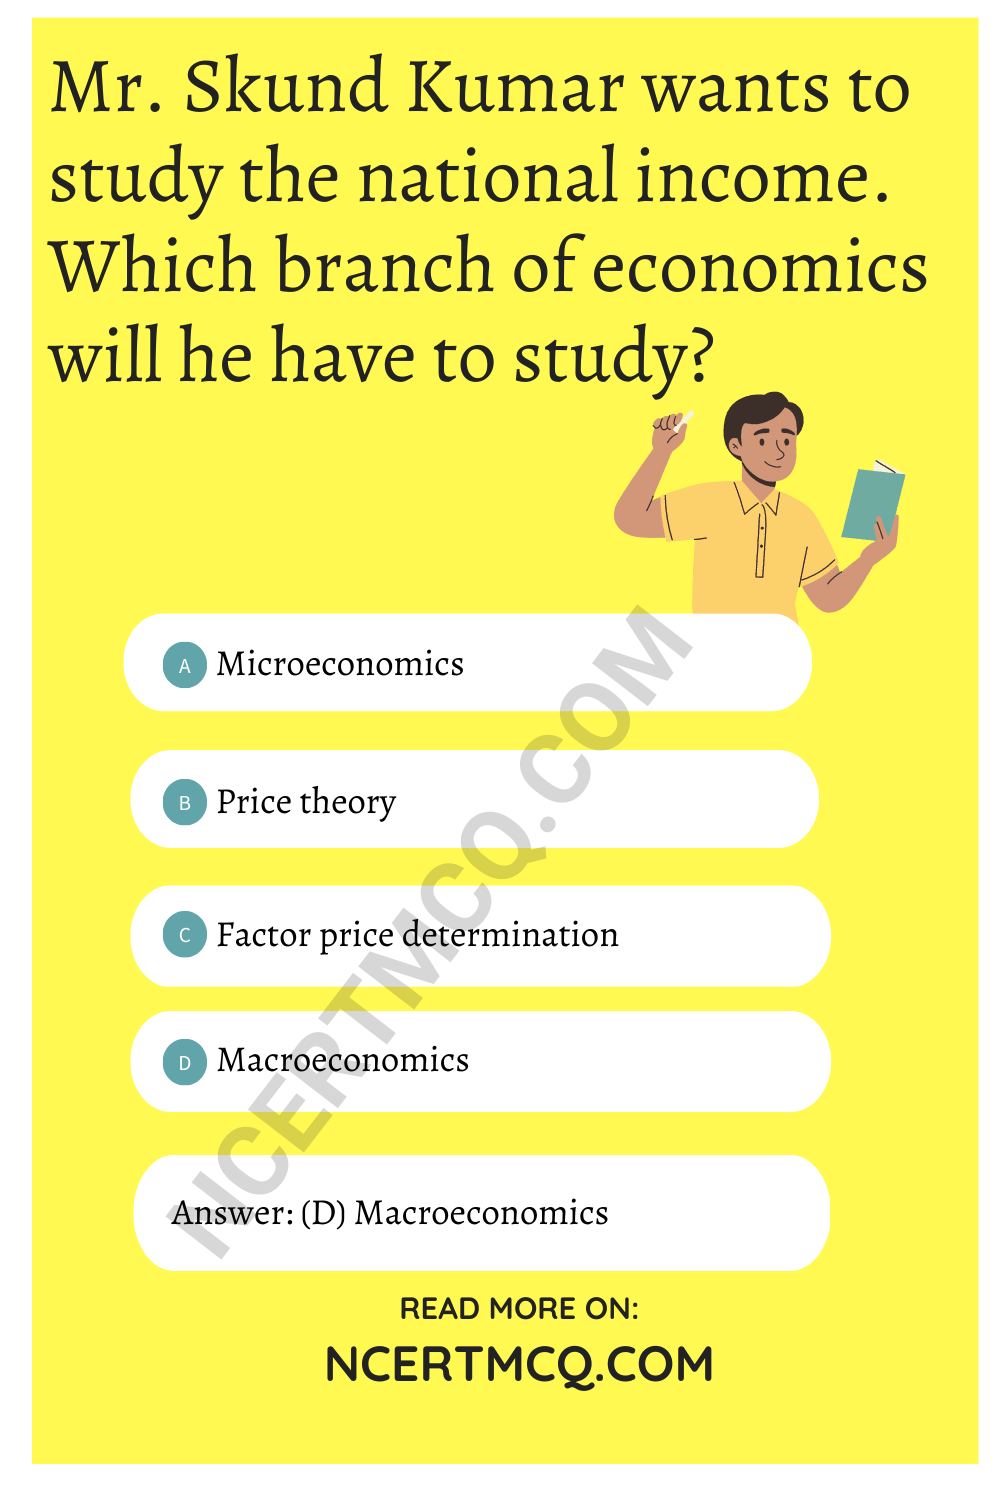 Mr. Skund Kumar wants to study the national income. Which branch of economics will he have to study?